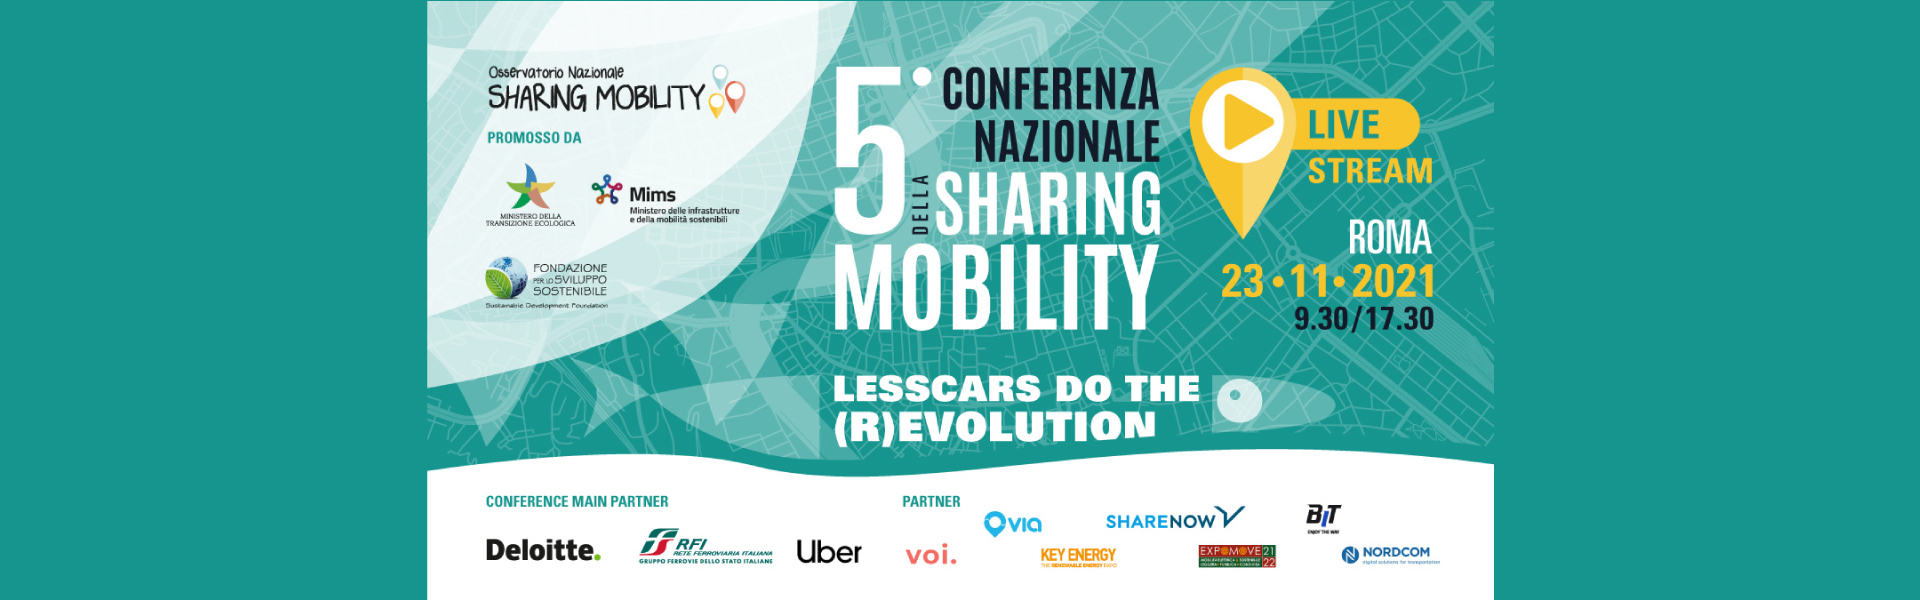 5 Conferenza sharing mobility